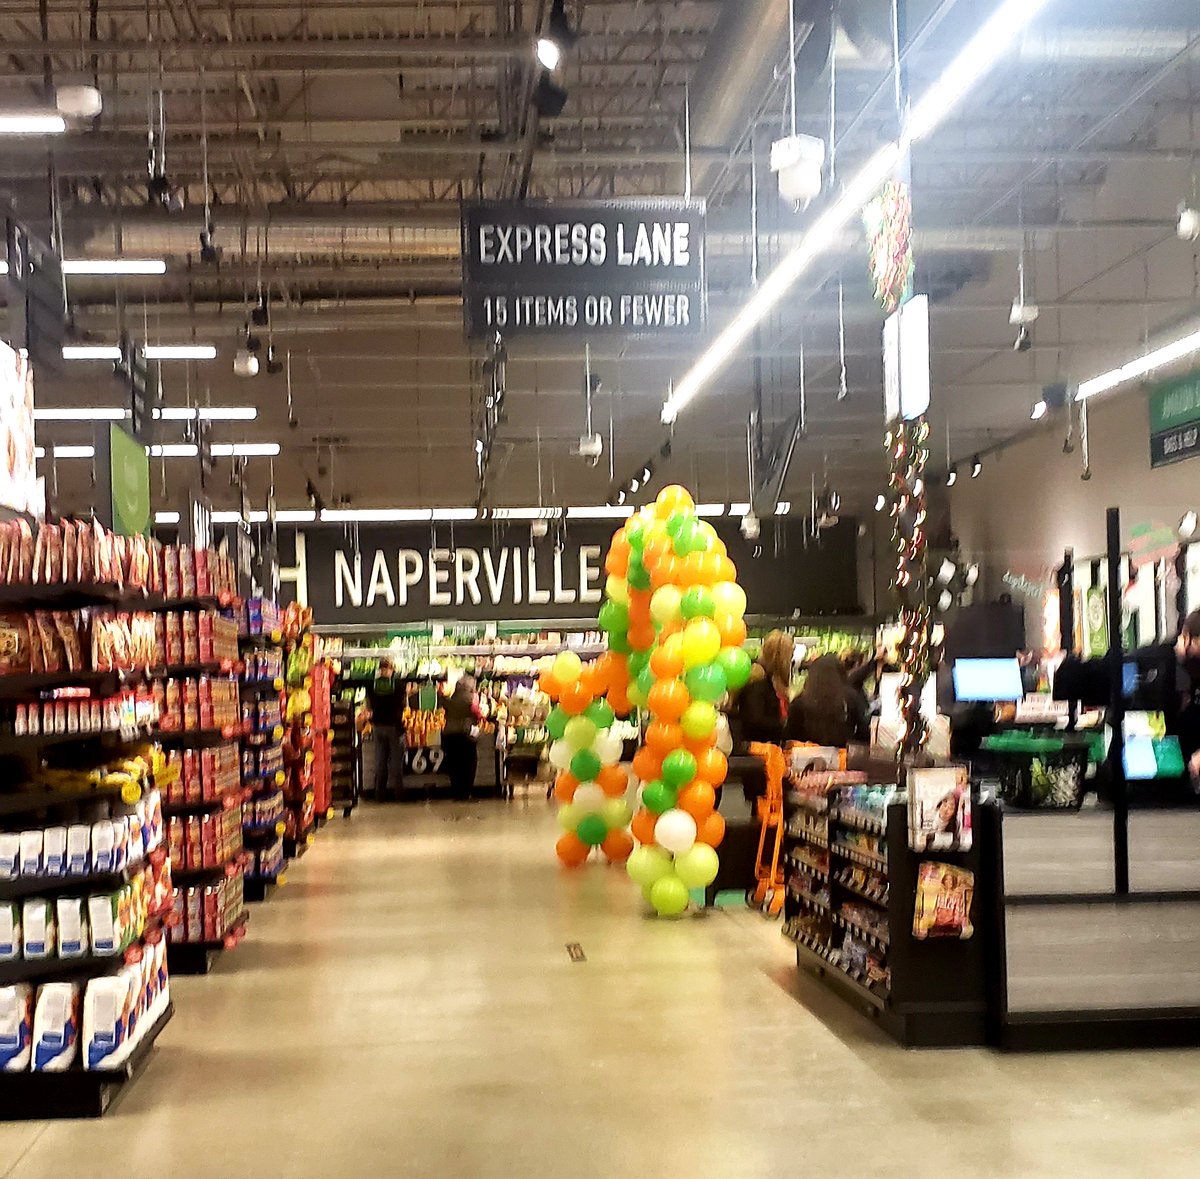 When using the Amazon Dash Cart experience, you exit through this lane, denoted by the balloons for the opening. A clerk was there to help acclimate shoppers to the experience. This is also the moment you would scan any coupons.